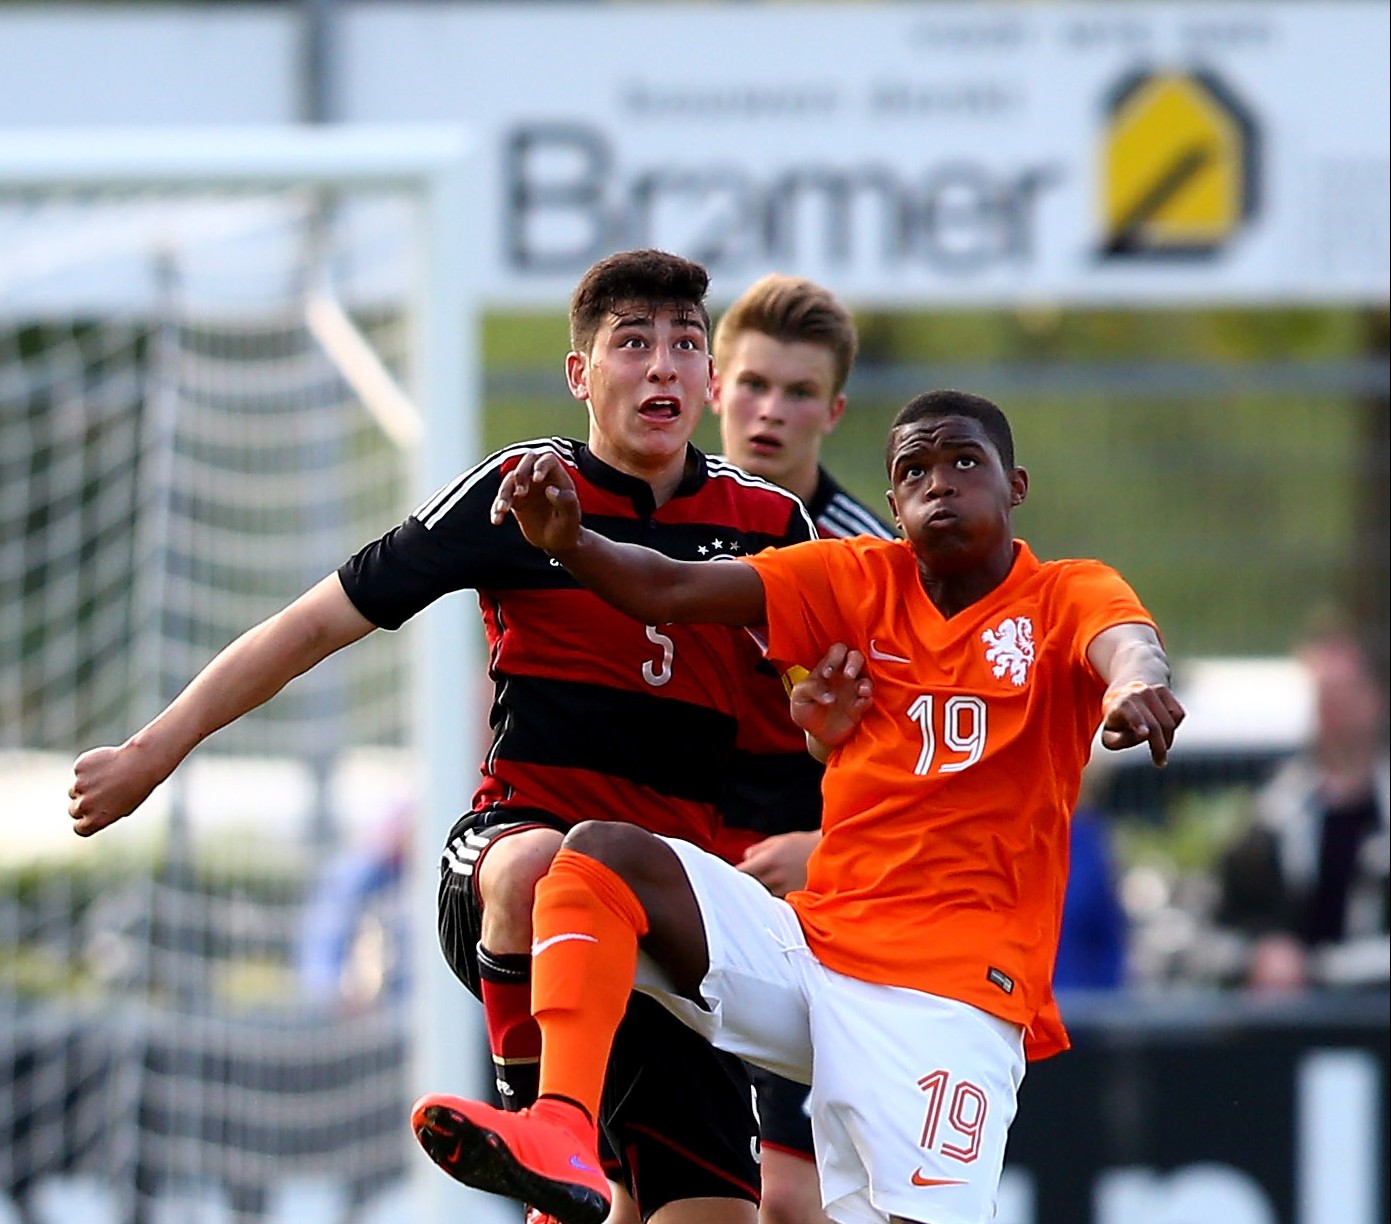 VRIEZENVEEN, NETHERLANDS - MAY 21:  (L-R) Stefano Russo of Germany challenges Daishawn Redan of Netherlands during the international friendly match between U15 Netherlands and U15 Germany at the DETO Twenterand Stadium on May 21, 2015 in Vriezenveen, Netherlands.  (Photo by Christof Koepsel/Bongarts/Getty Images)